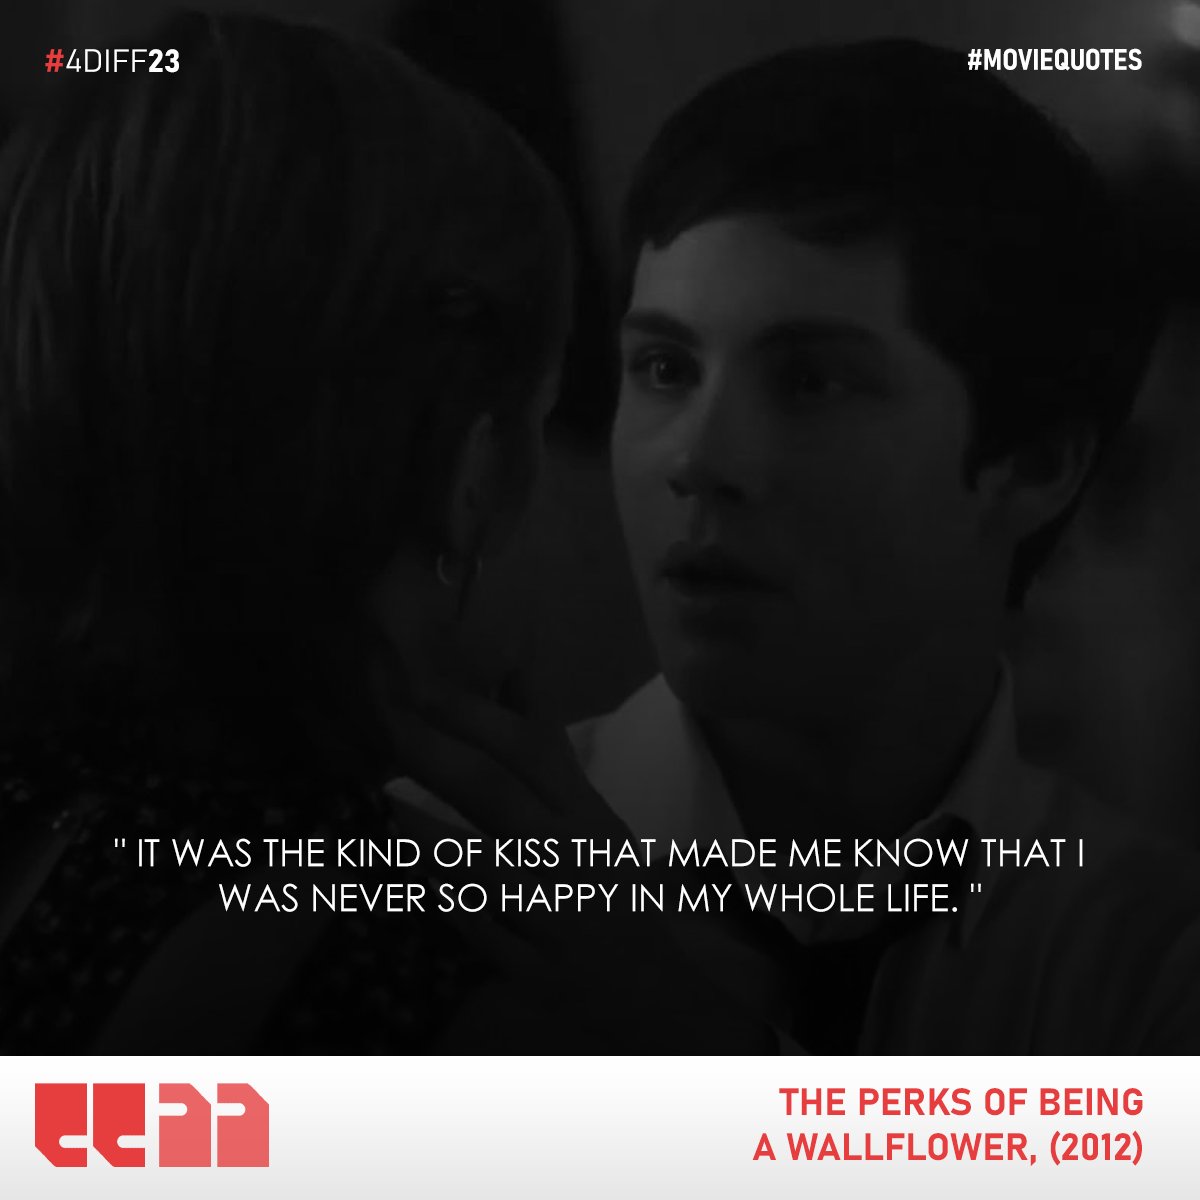 'It was the kind of kiss that made me know that I was never so happy in my whole life.' - The Perks of Being a Wallflower(2012)

#PerksofBeingaWallflower #fdiff #LoganLerman #EmmaWatson #EzraMiller